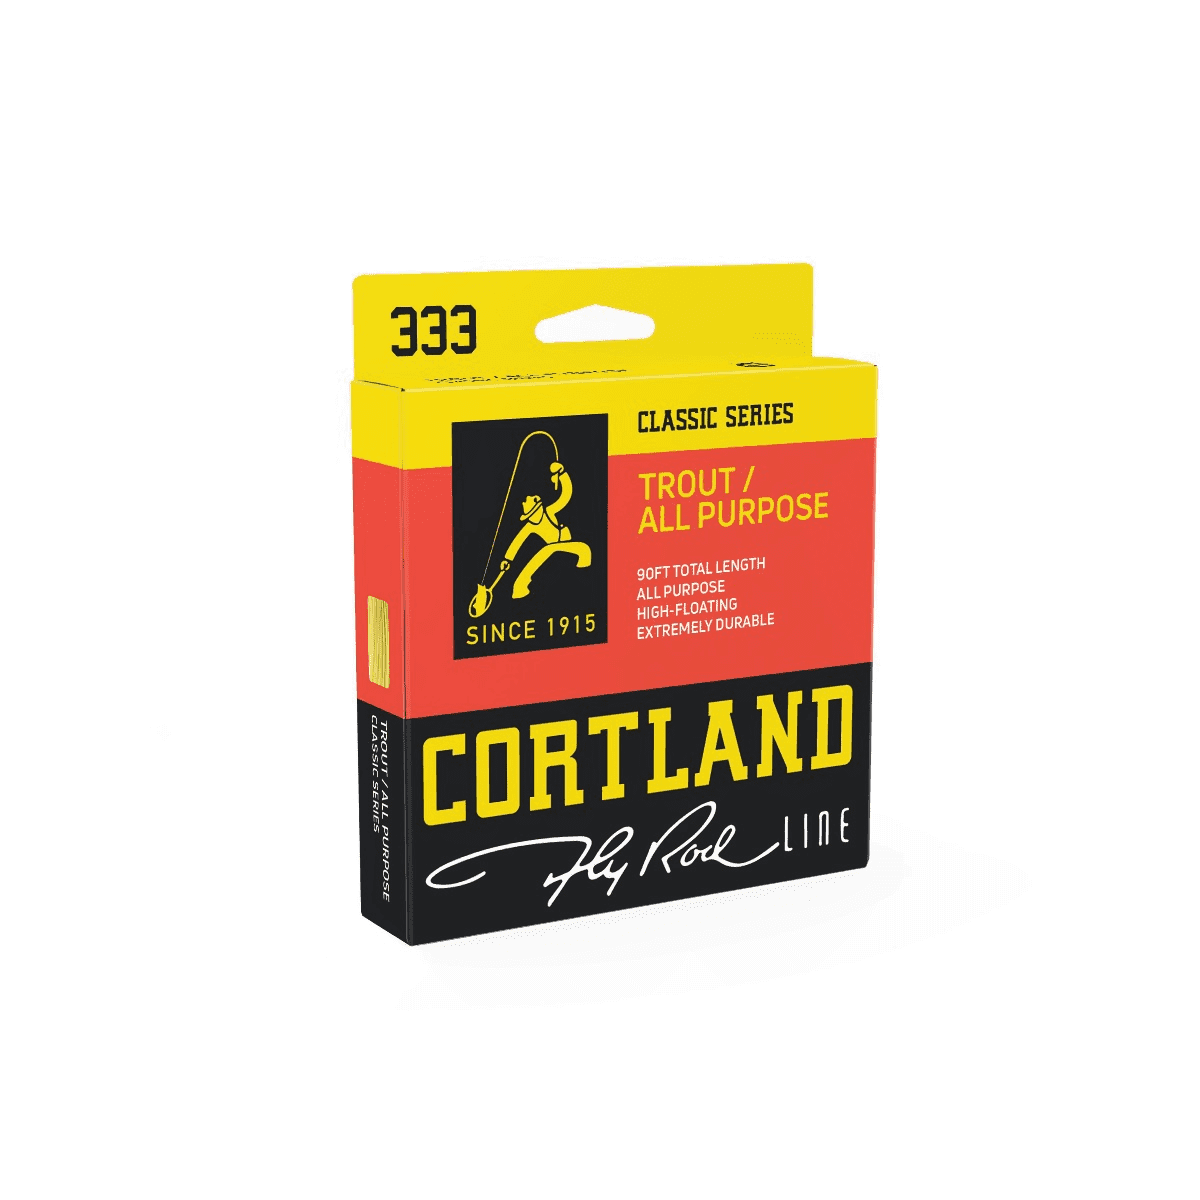 Cortland Classic Series 333 Trout/ALL Purpose Fly Line – Weaver's